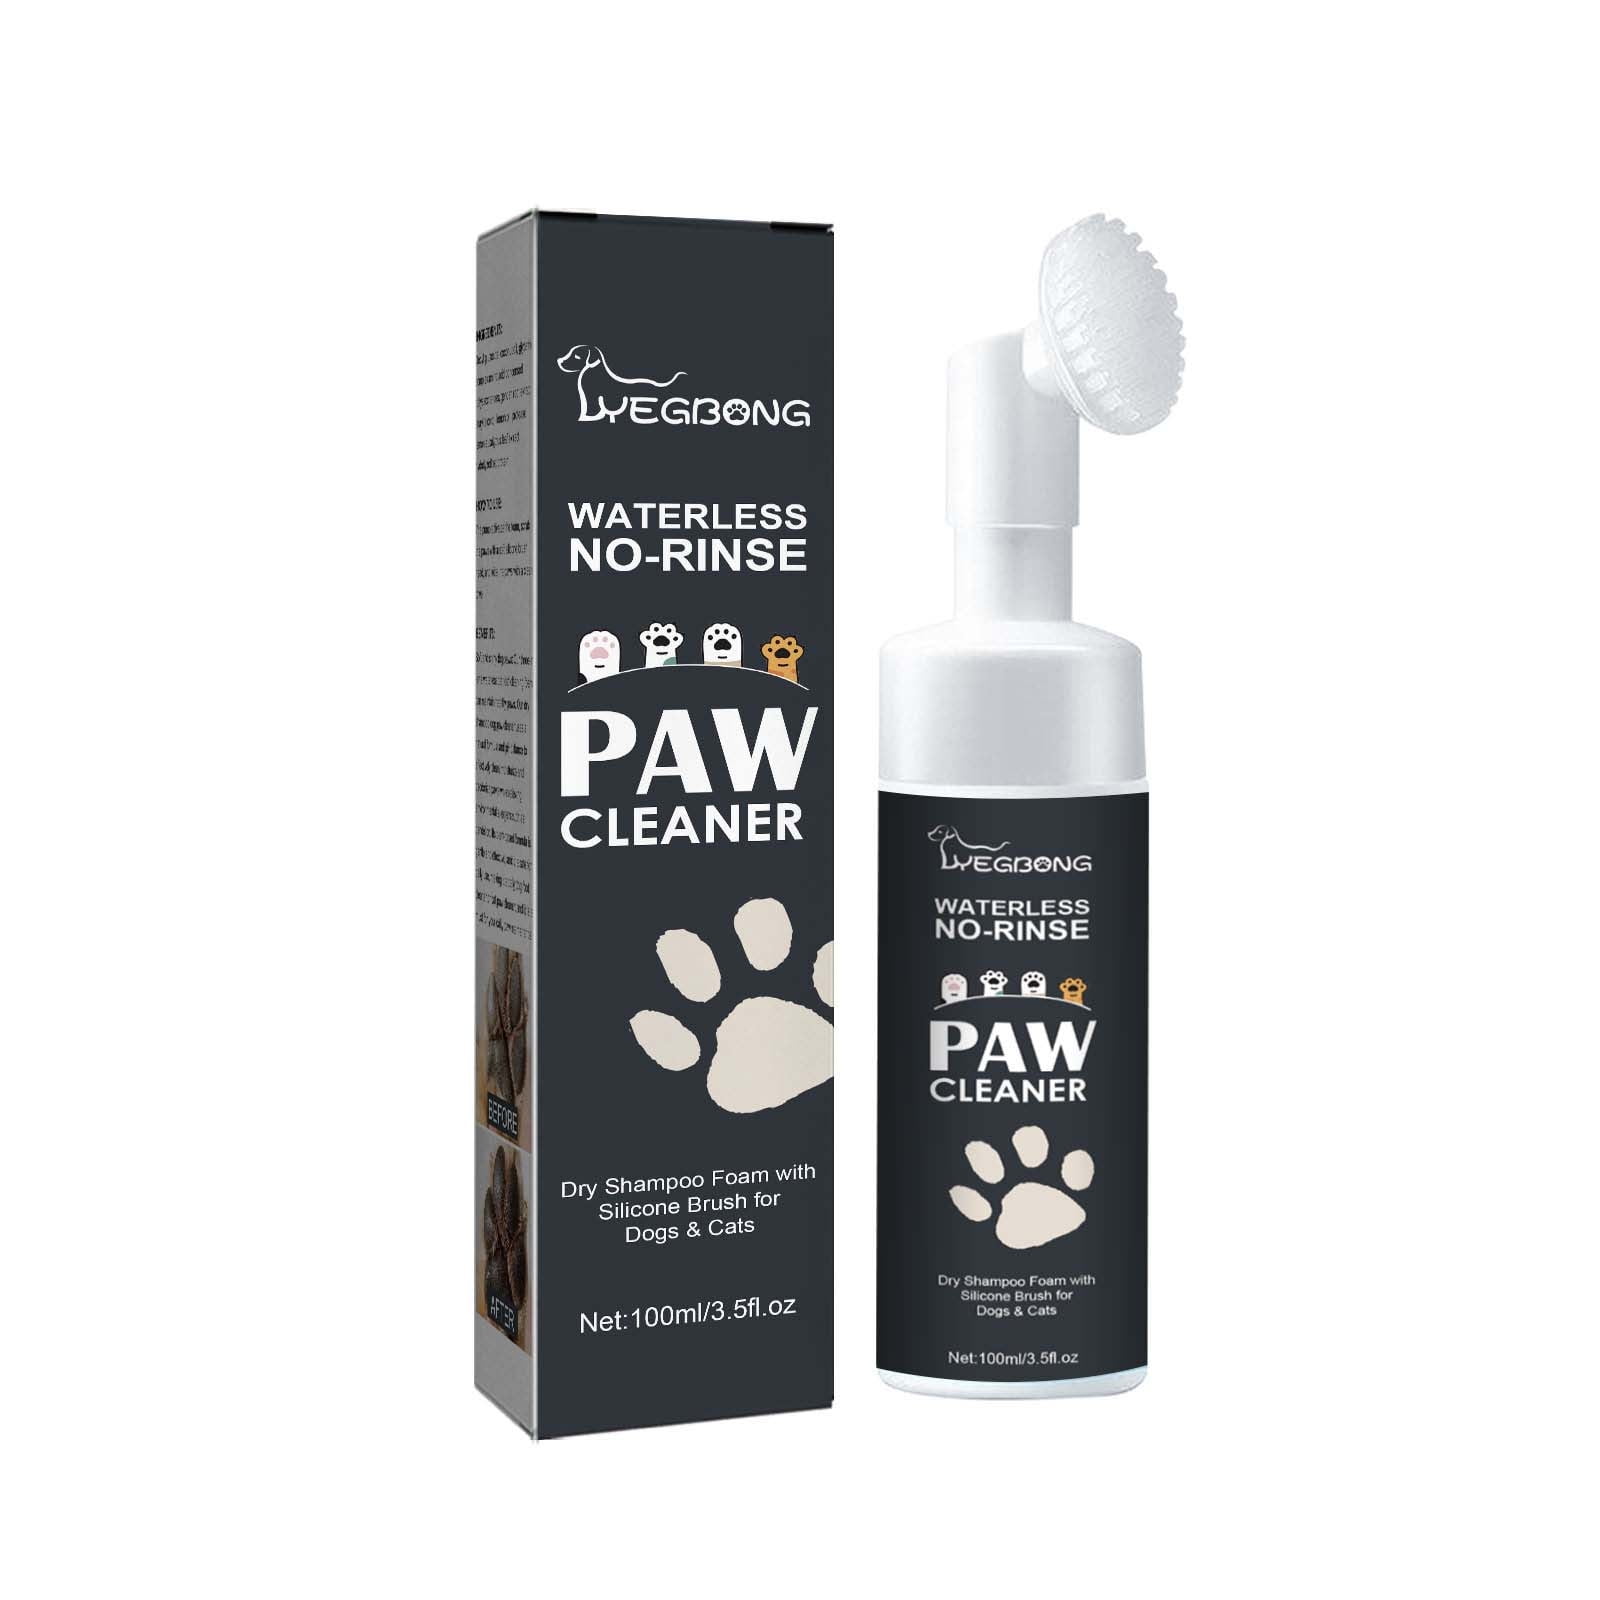 Fanny Foam No Rinse Waterless Dog Shampoo and Paw Cleaner for Dogs |  Dingleberry Removal | Easy Glide Formula Loosens Stuck On Dirt, Debris from  Fur